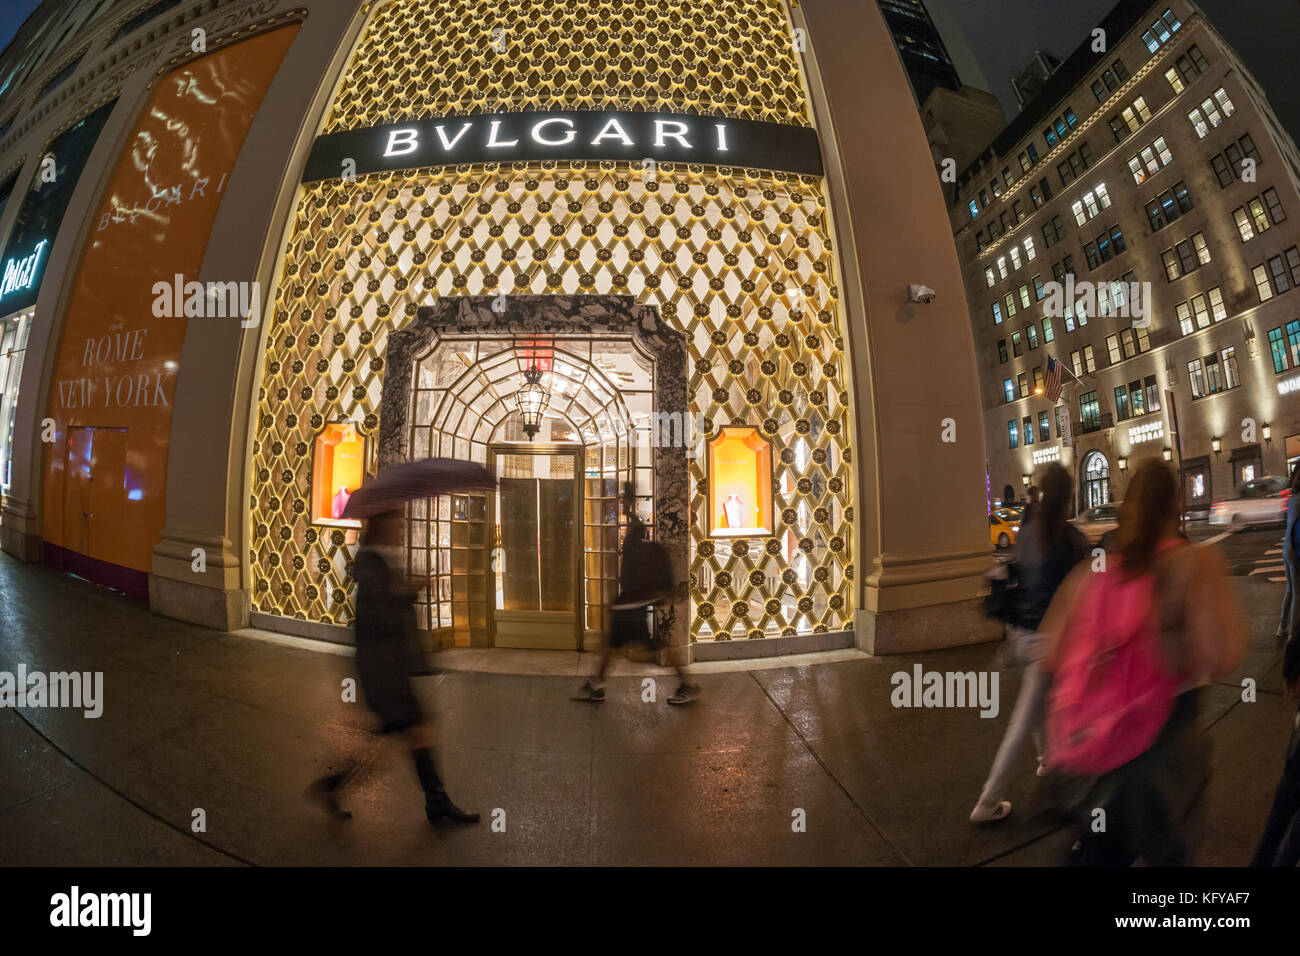 The newly renovated Bulgari jewelry store in Midtown Manhattan in New York is seen on Tuesday, October 24, 2017. Bulgari SpA is a unit of the luxury goods conglomerate LVMH Moet Hennessy Louis Vuitton SA which acquired it in 2011. (© Richard B. Levine) Stock Photo